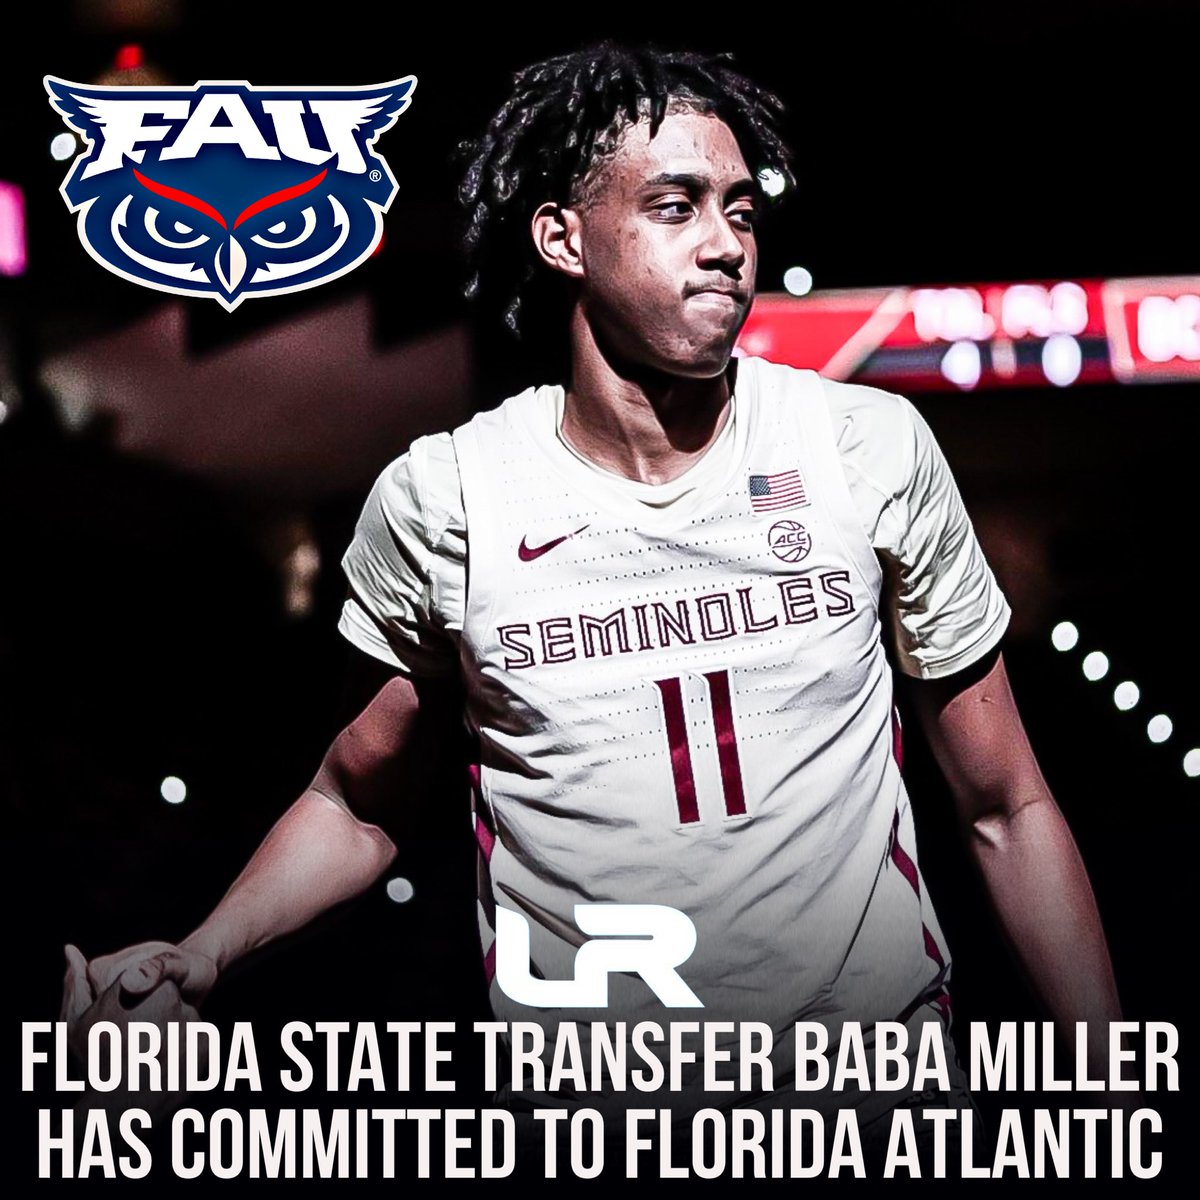 NEWS: Florida State transfer Baba Miller has committed to Florida Atlantic, multiple sources told @LeagueRDY. @DraftExpress was first. Miller just wrapped up his sophomore season, playing two seasons with the Seminoles. He’s a native of Mallorca, Spain. He averaged 7.6PPG,